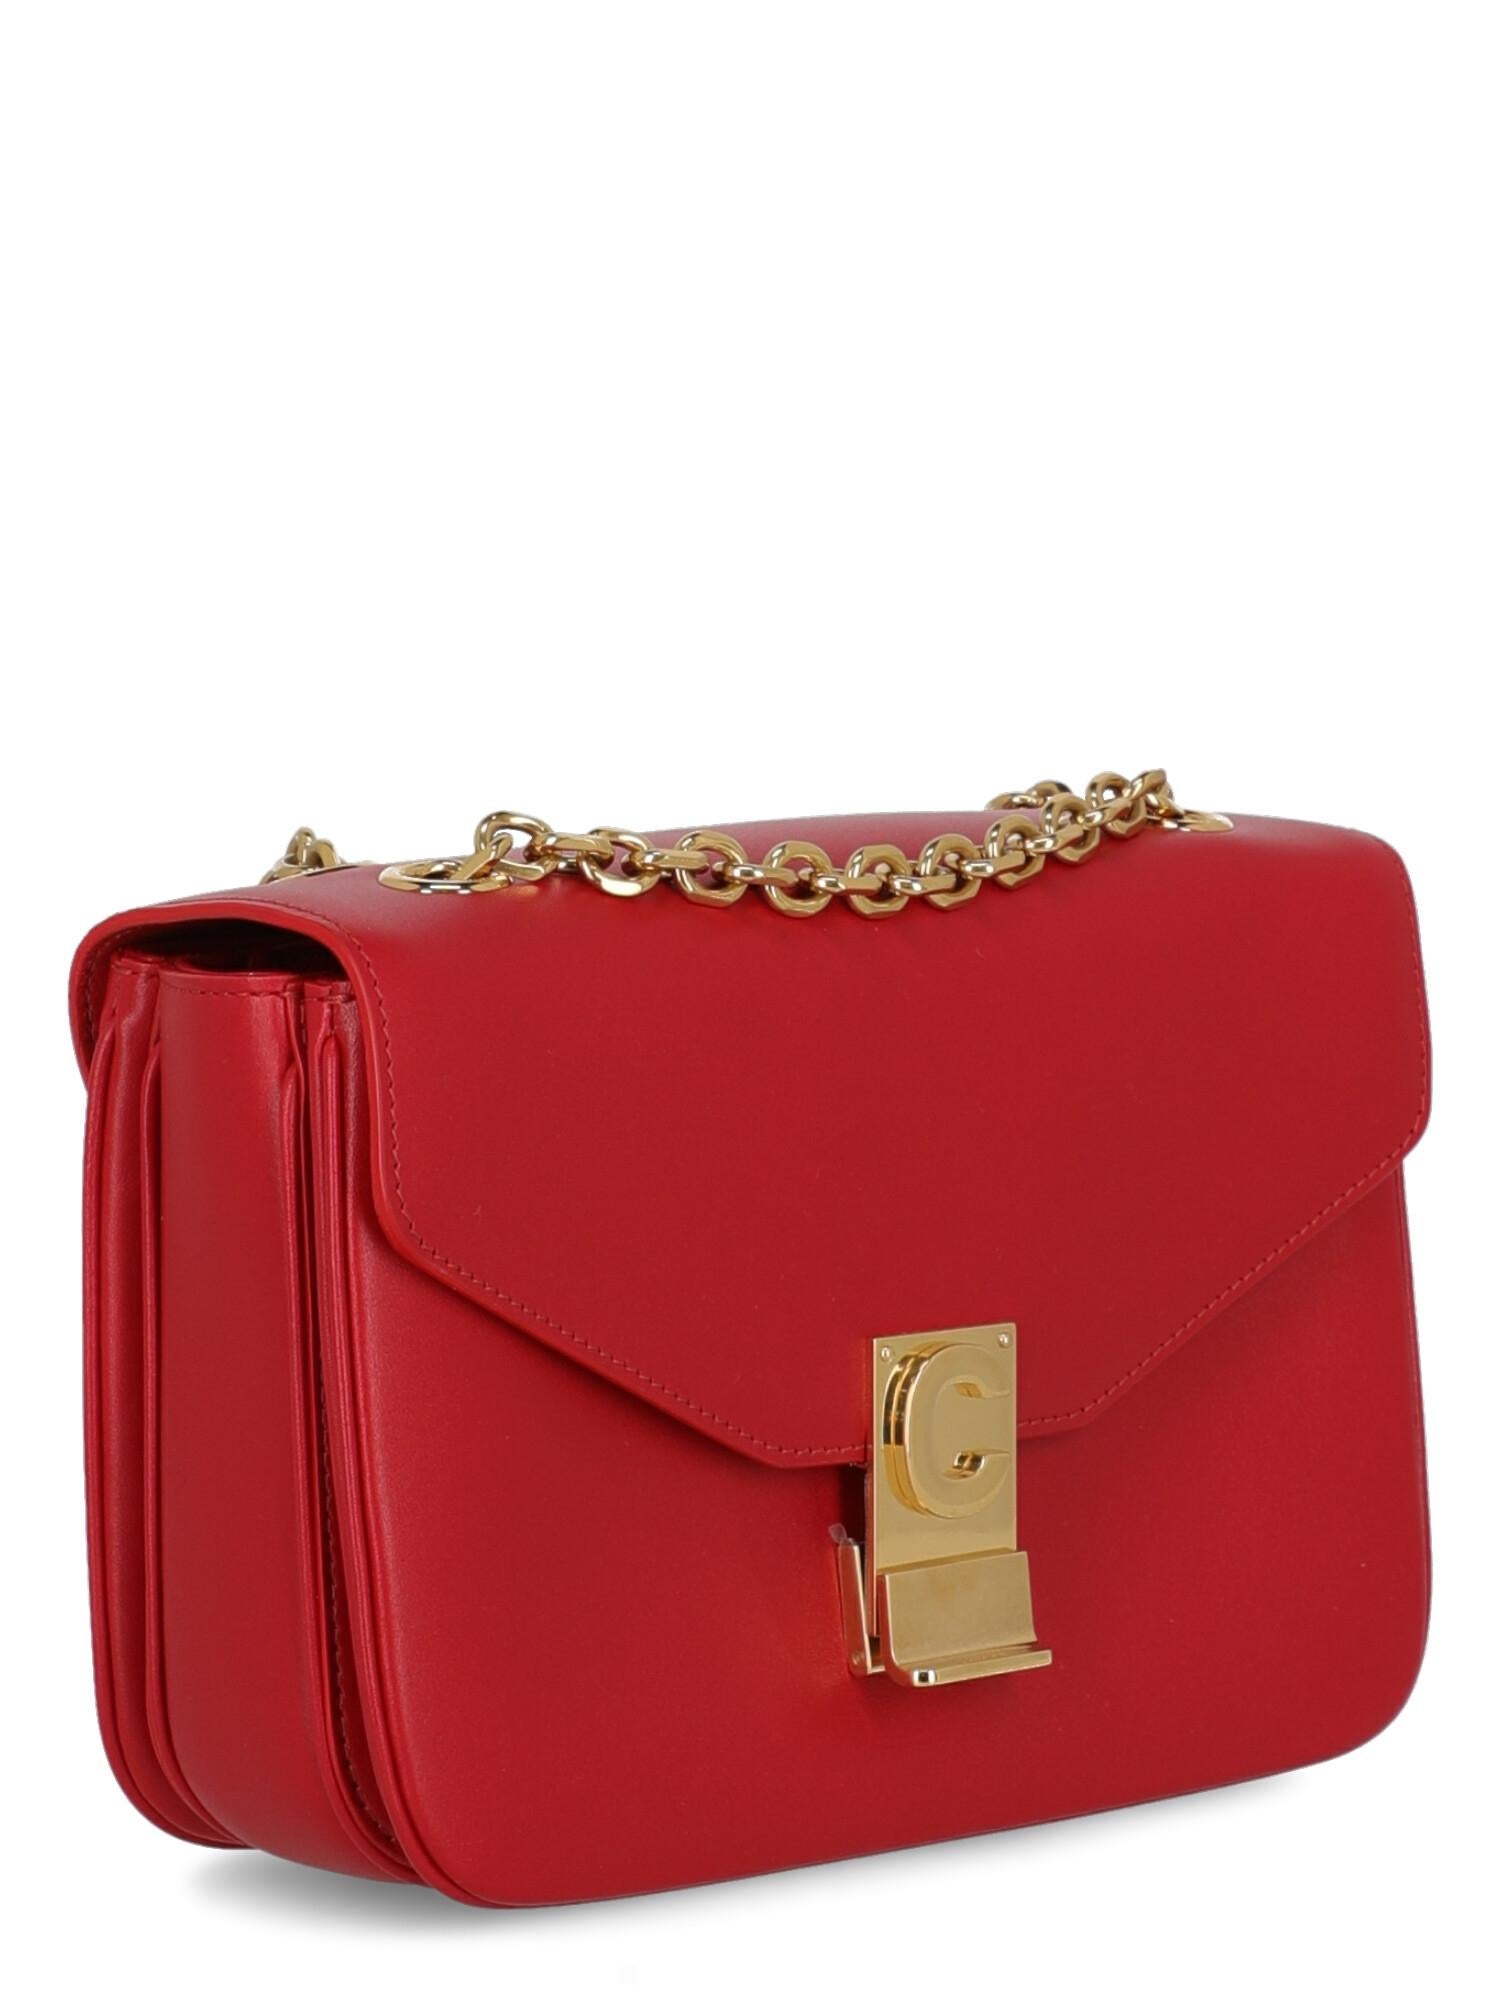 Celine  Women Handbags  Red Leather In Excellent Condition For Sale In Milan, IT